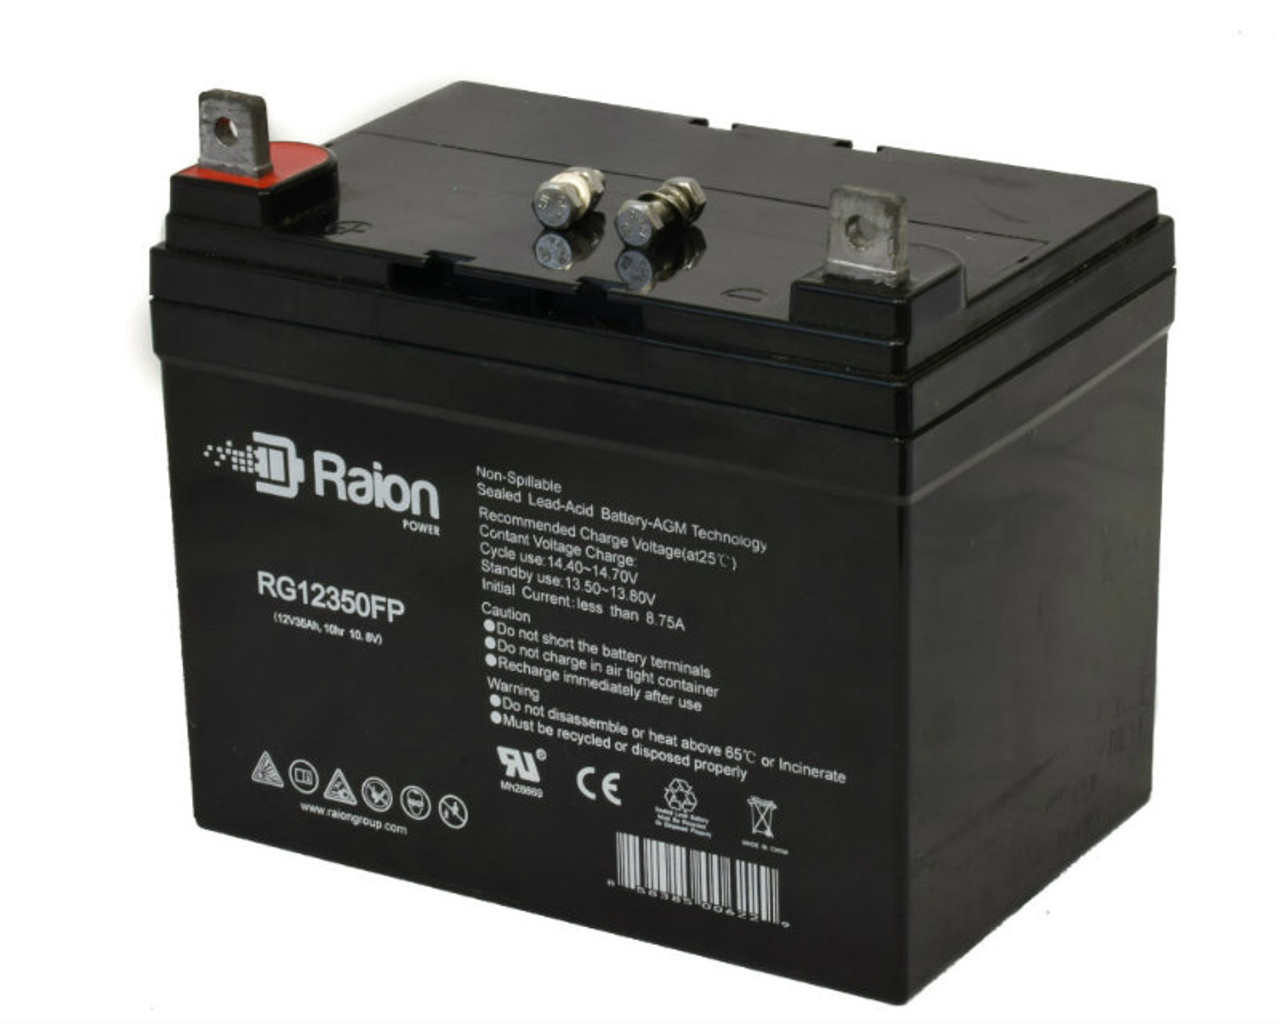 Raion Power Replacement 12V 35Ah RG12350FP Mobility Scooter Battery for Everest & Jennings Wheelchairs Marathon 3W